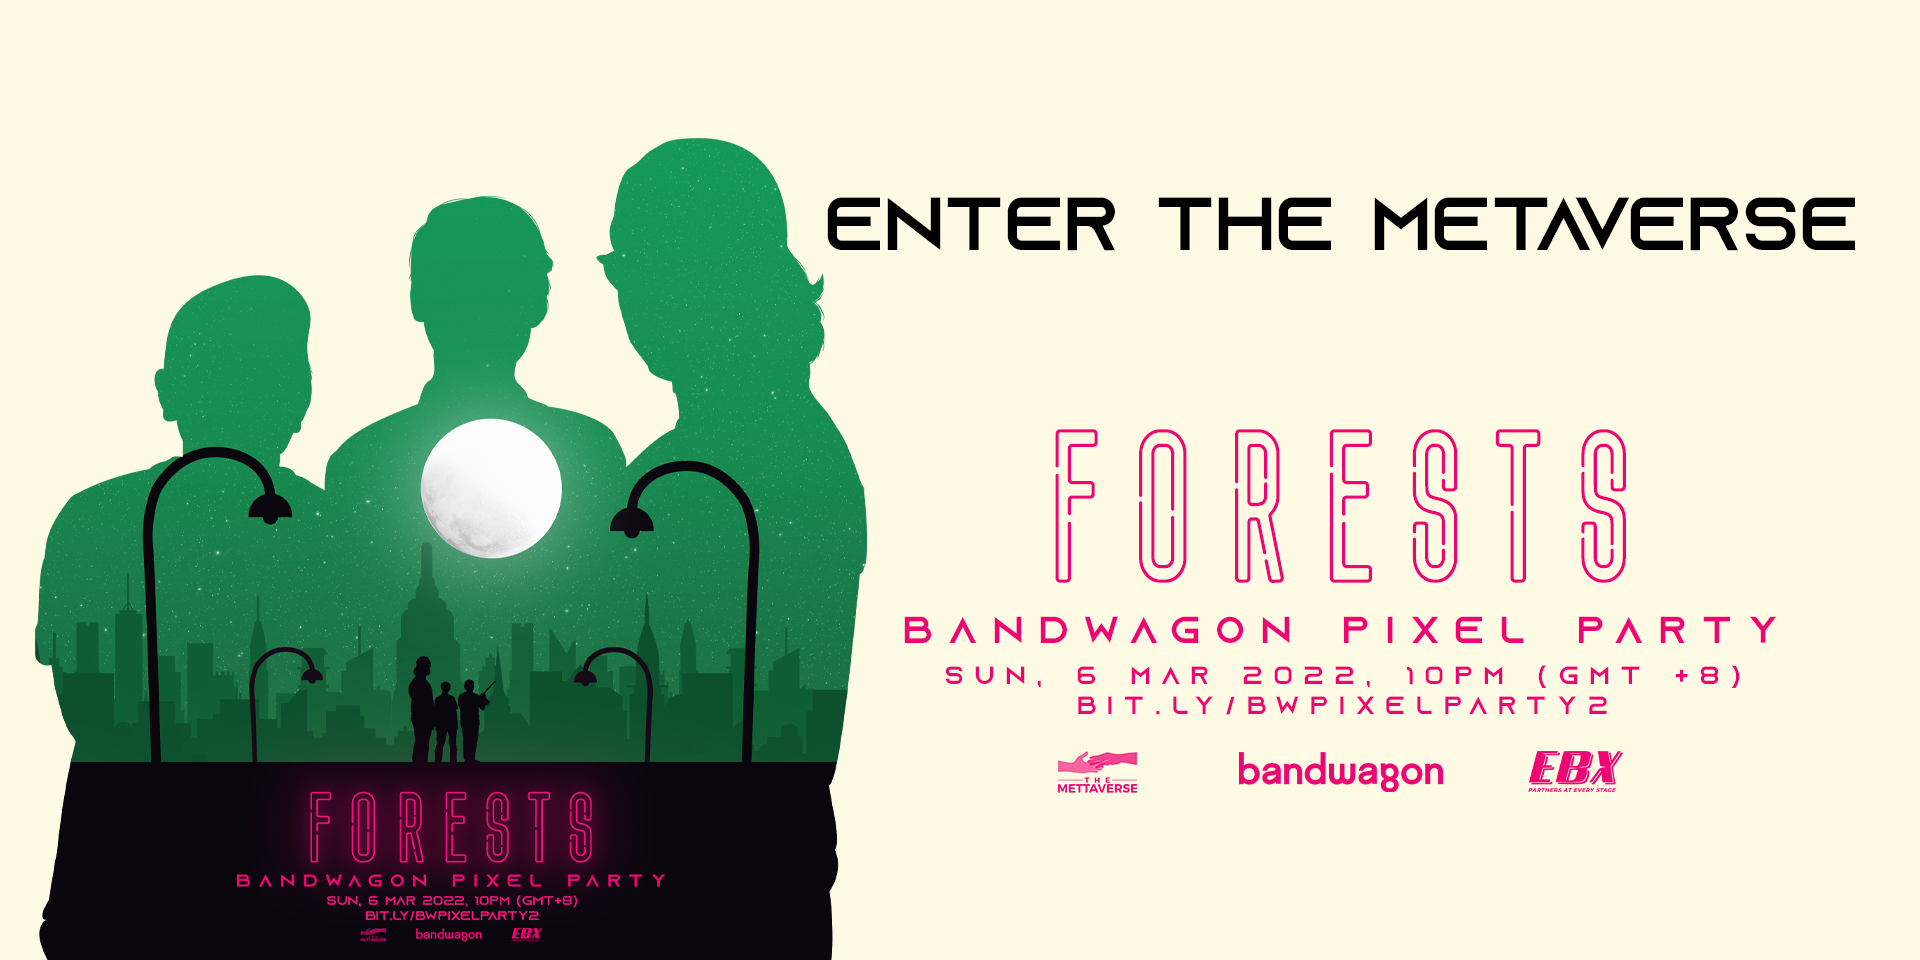 Forests to debut new music in the Metaverse at Bandwagon Pixel Party, here's everything you need to know